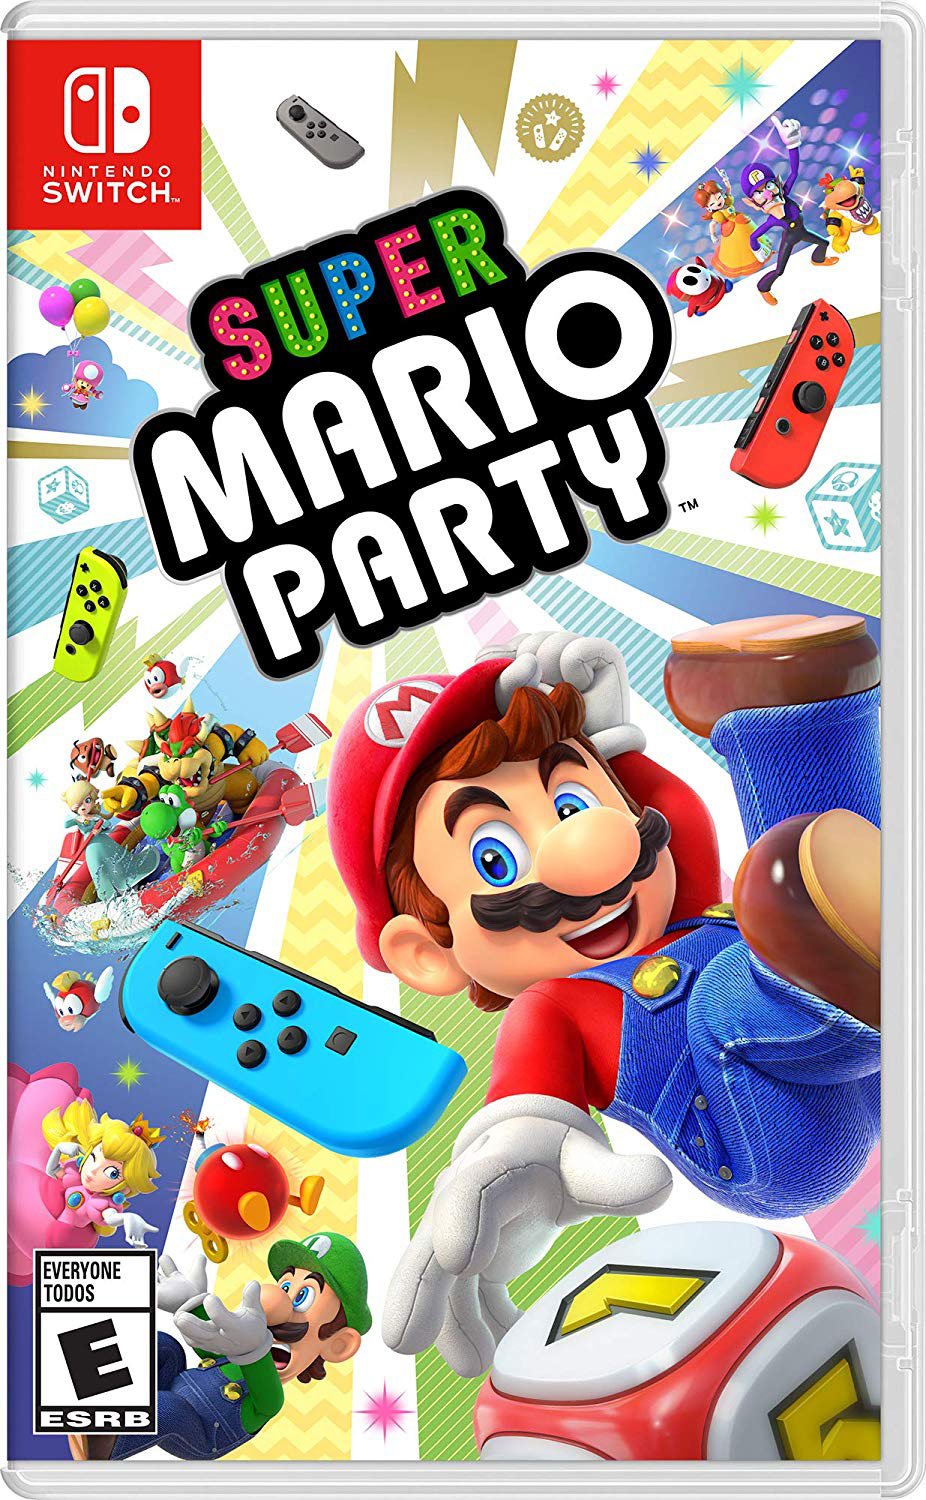 Super Mario Party for Switch